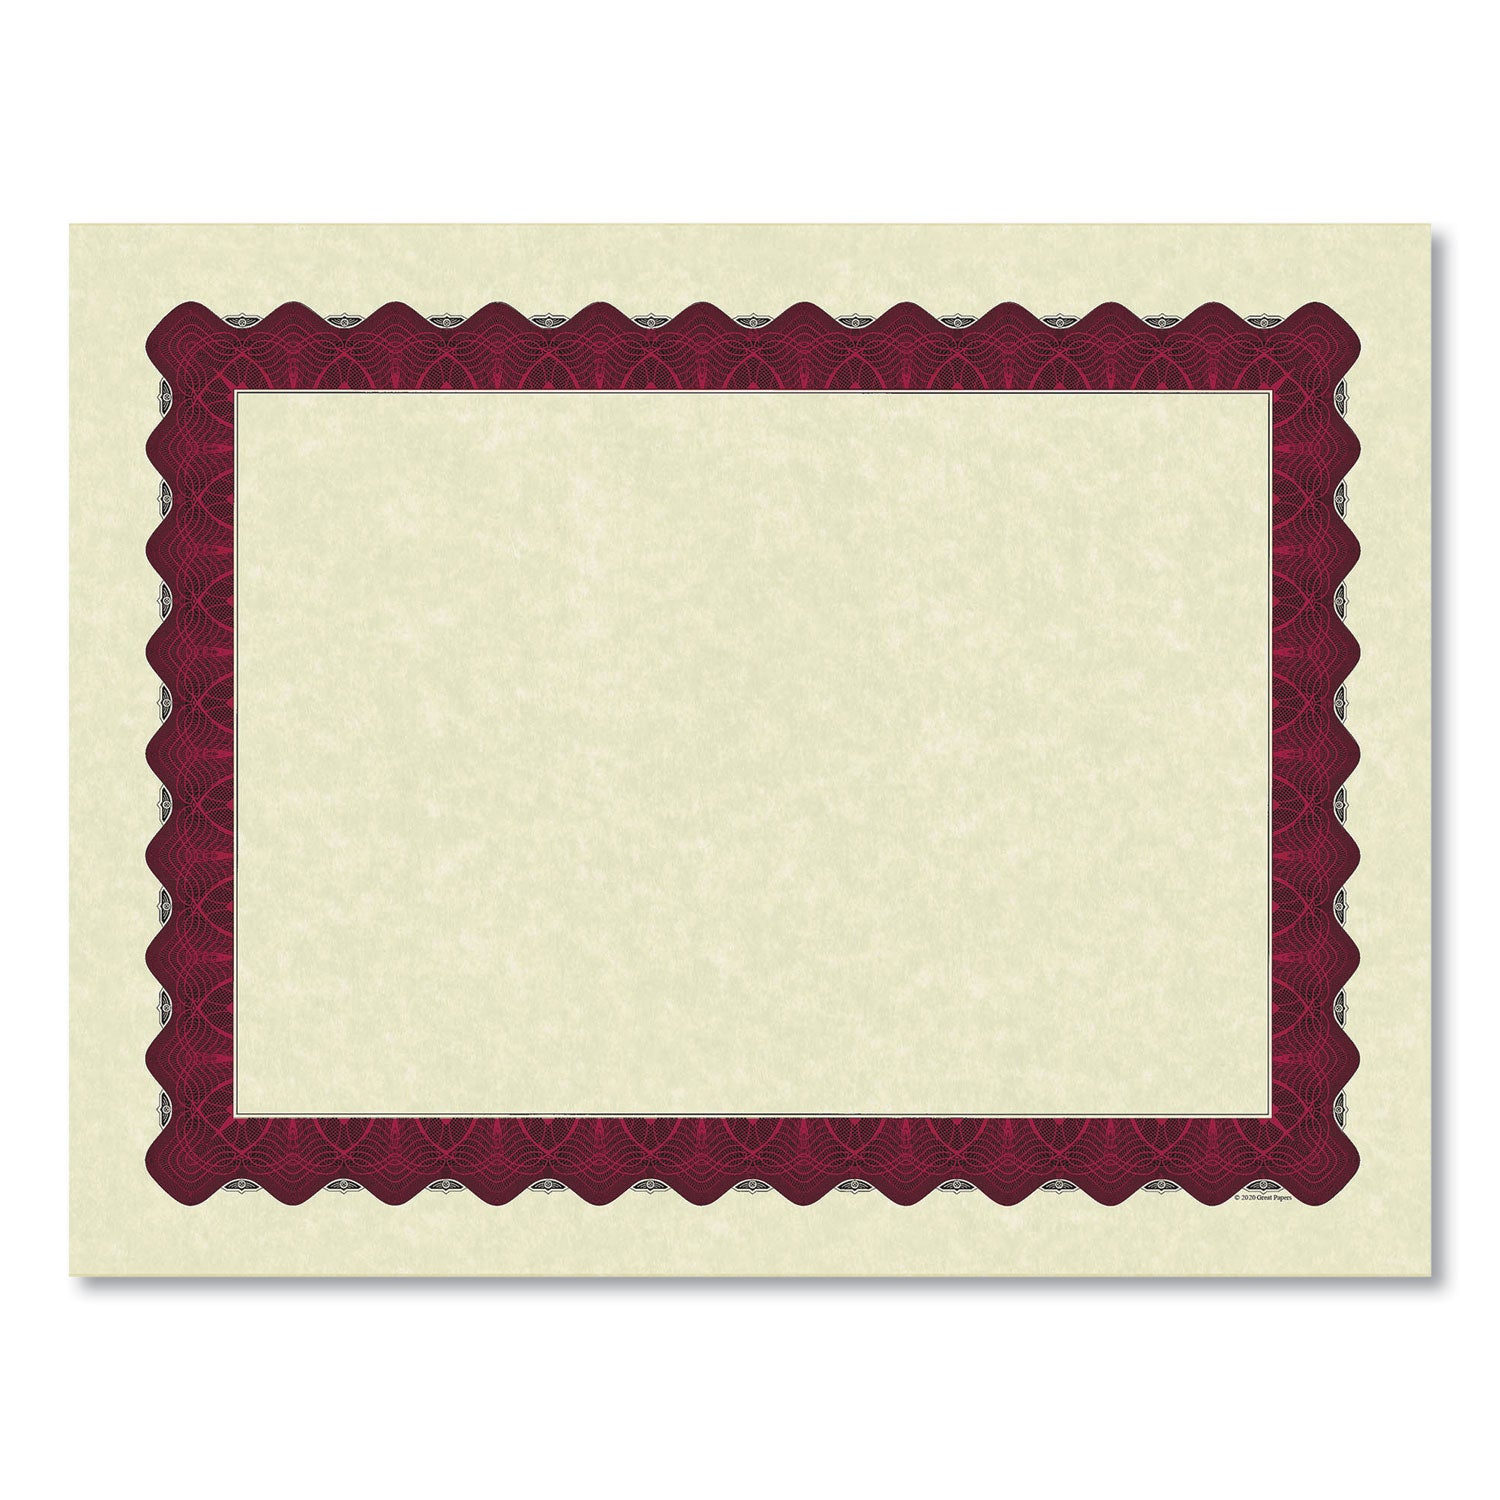 metallic-border-certificates-11-x-85-ivory-red-with-red-border-100-pack_grp934100 - 2